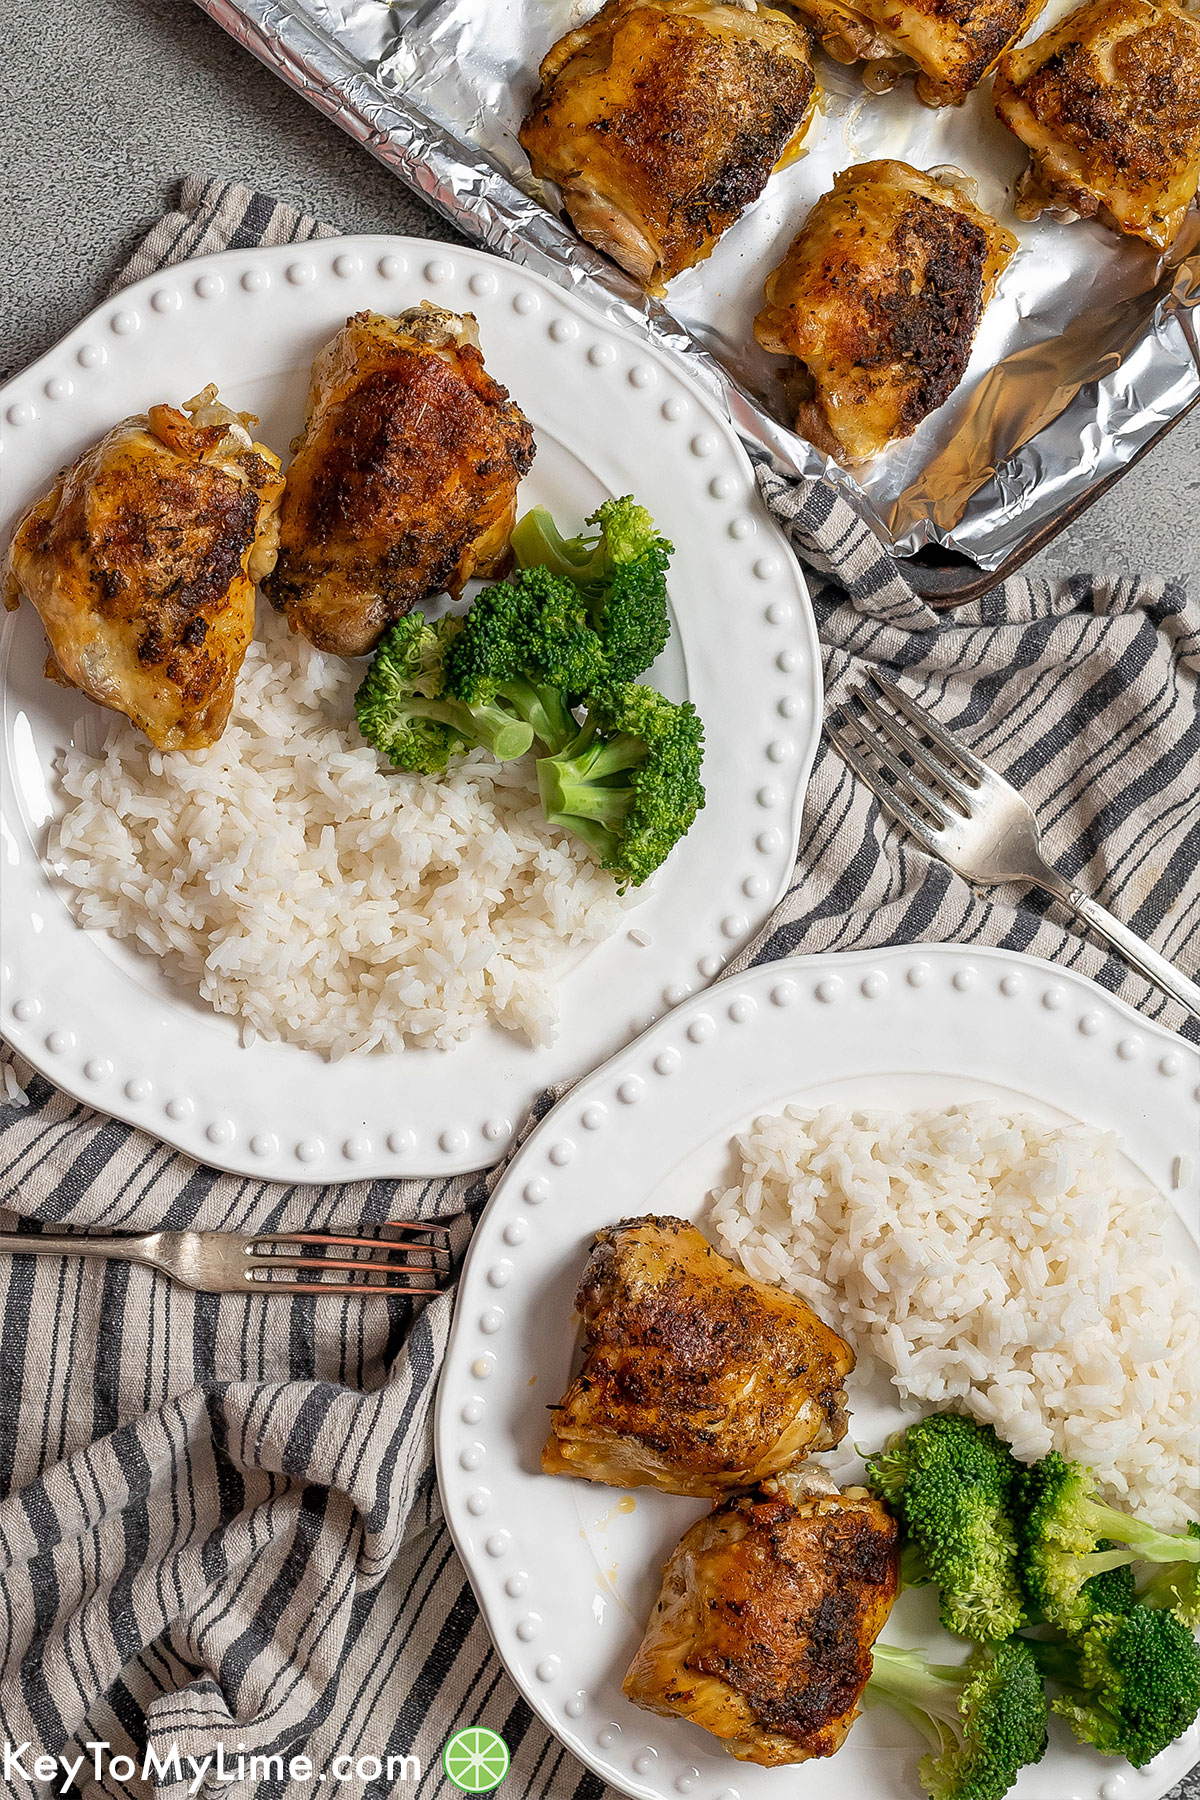 An image with multiple plates filled with delicious broccoli, rice and crispy chicken thighs.